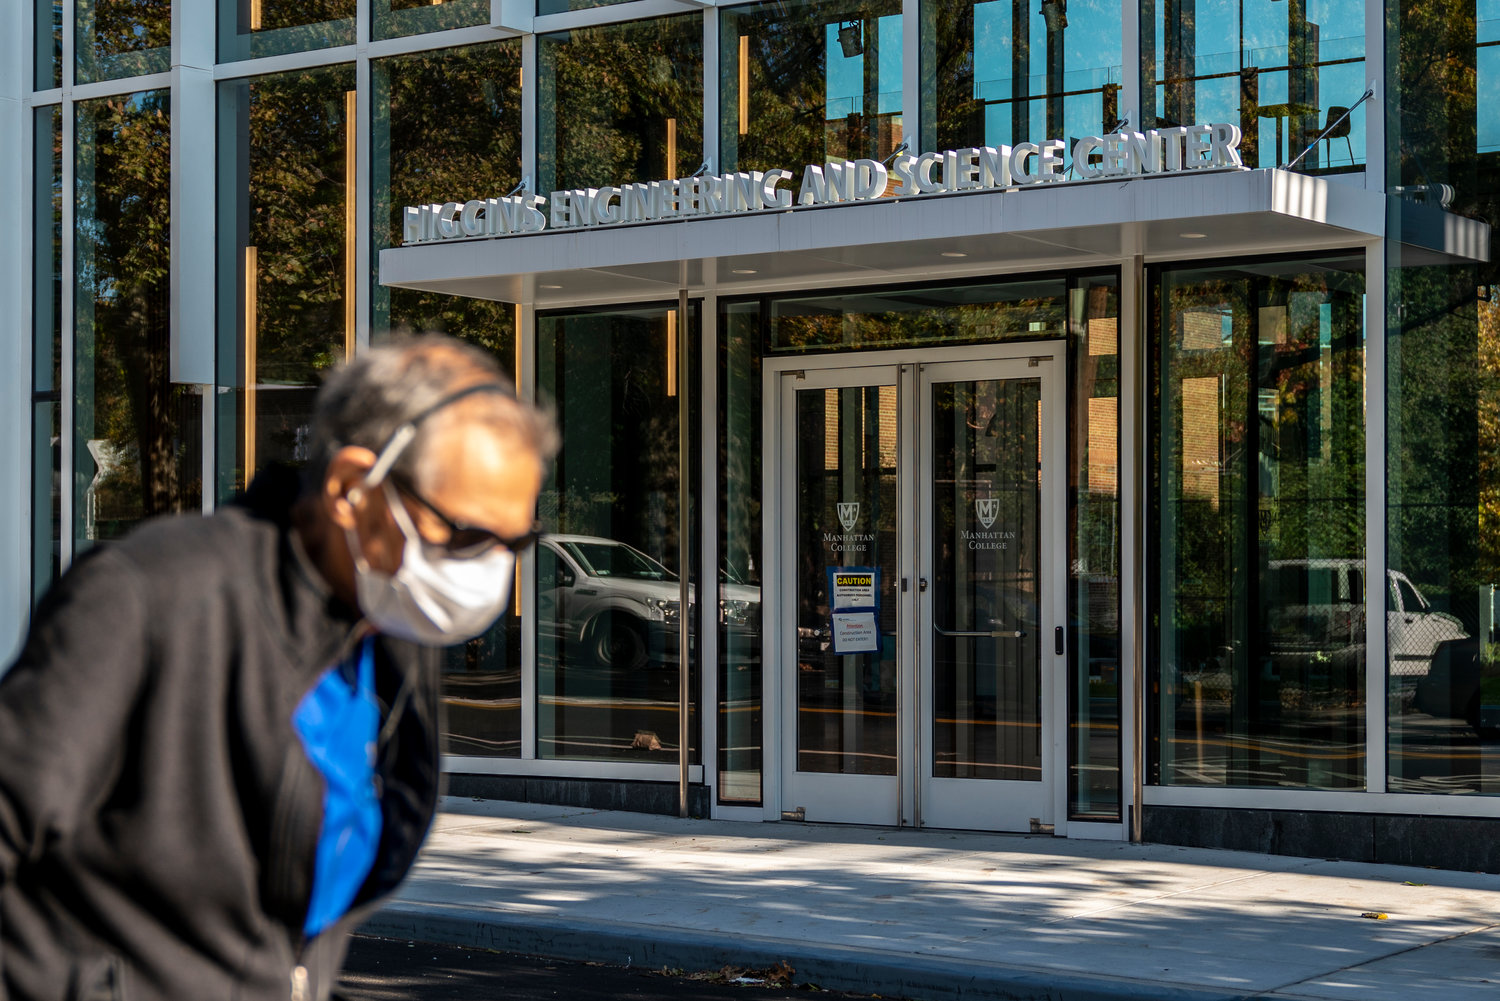 Manhattan College is one of several higher education institutions nationwide that furloughed employees in the wake of budget shortfalls — courtesy of the coronavirus pandemic. At Manhattan, more than two dozen were sent home beginning Oct. 30.